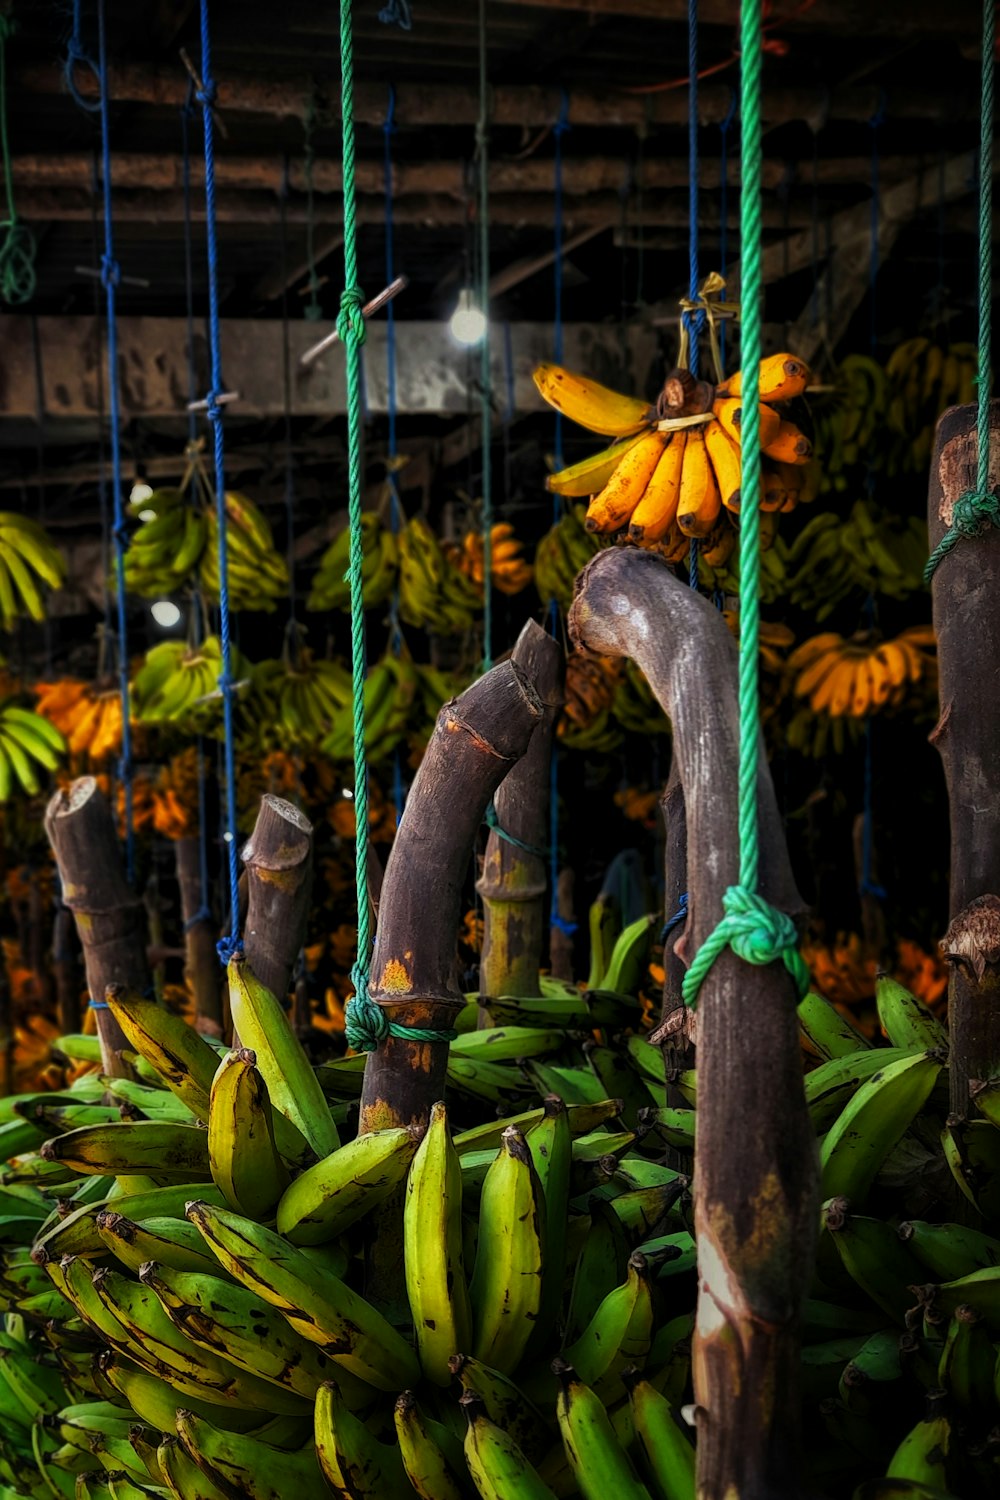 bunches of bananas hanging from ropes in a market